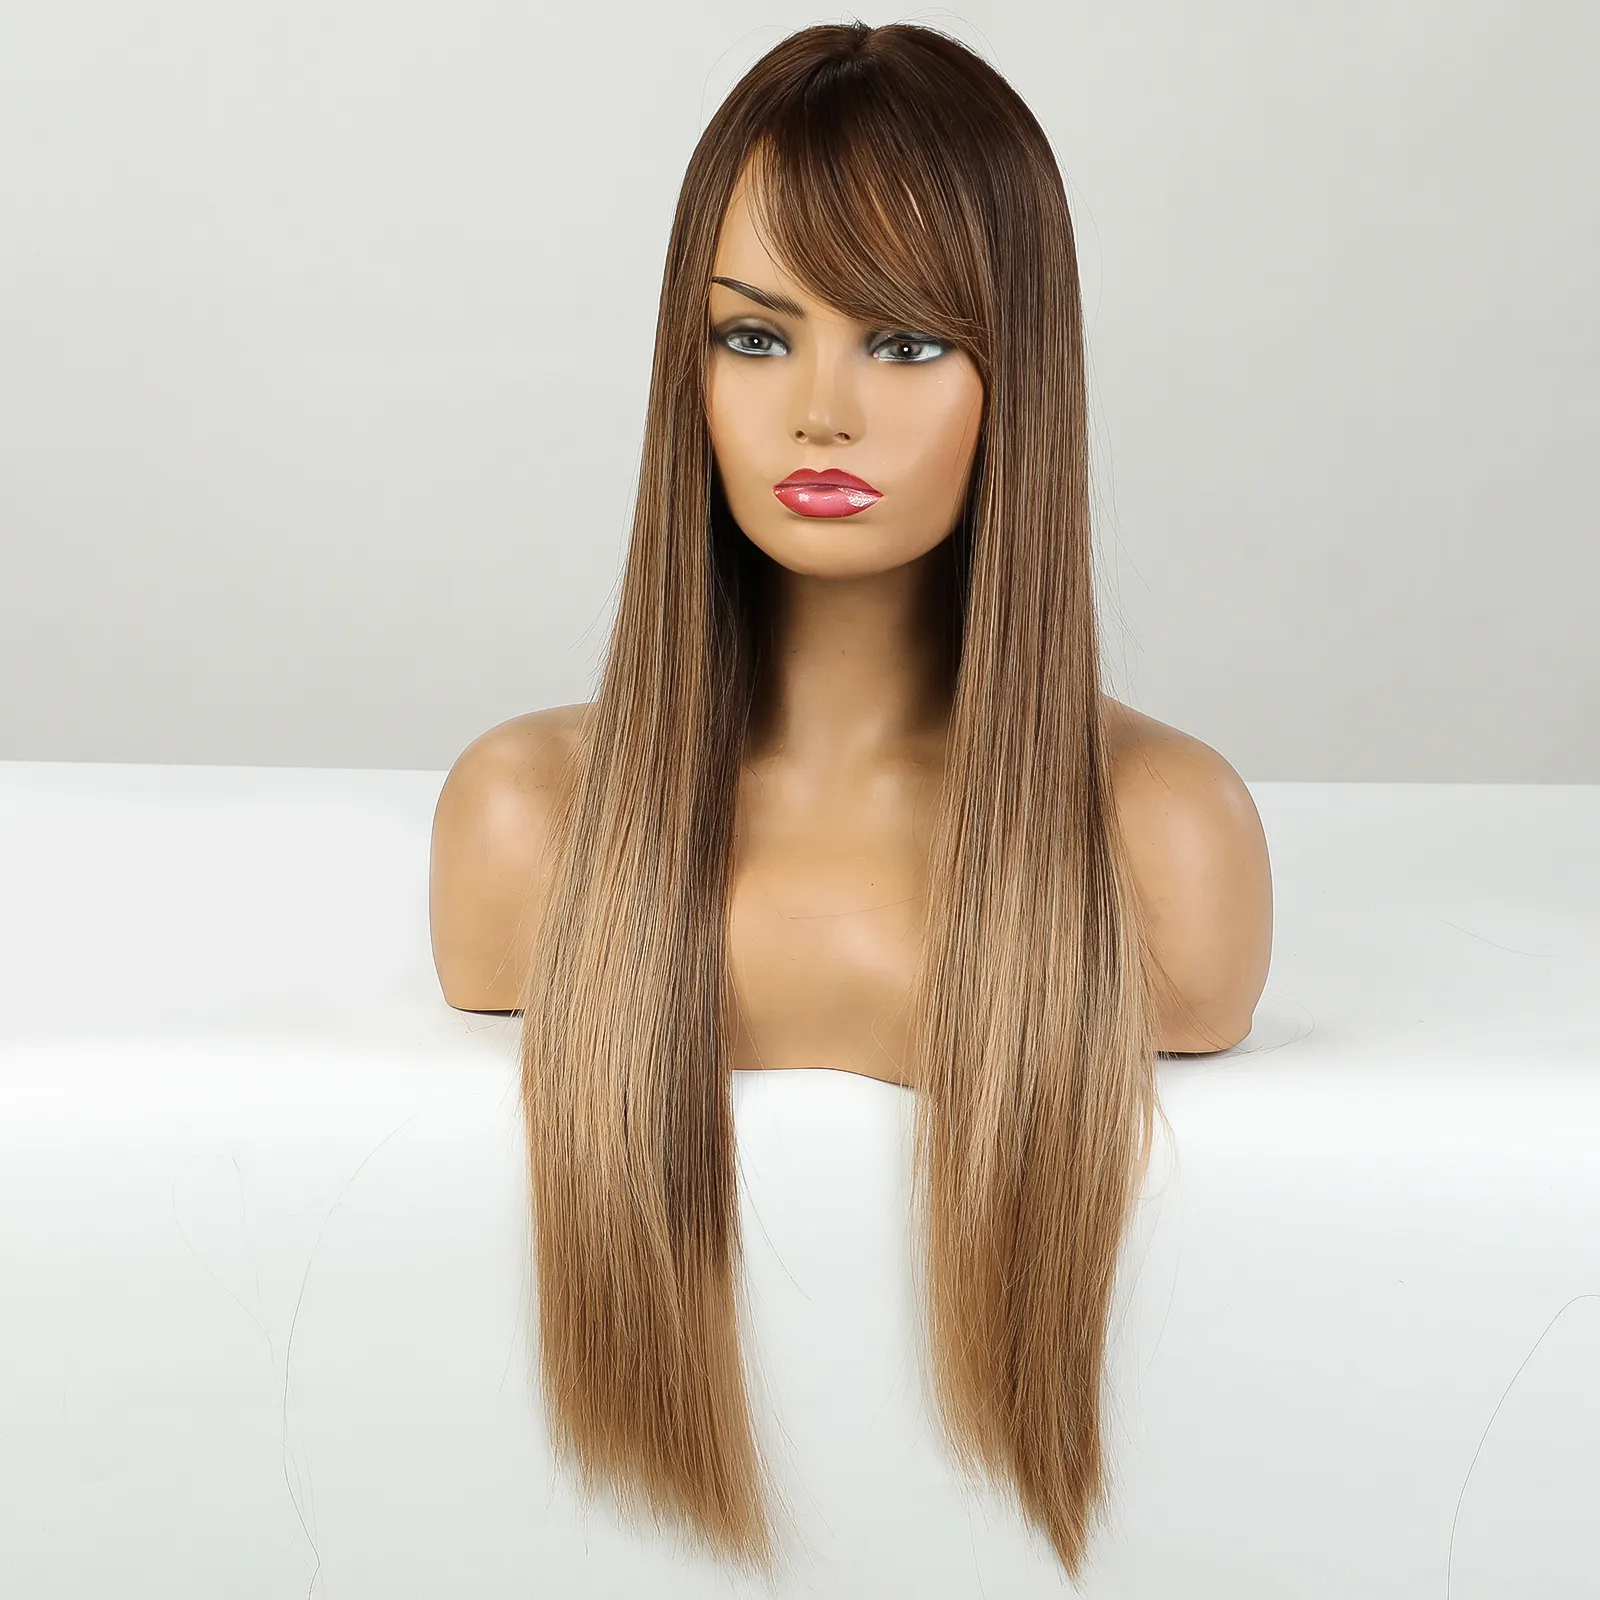 Long Straight Synthetic Wigs Ombre Brown Blonde Wig With Side Bangs For Women Cosplay Daily Party Heat Resistant Fiber Fake Hairfactory dire